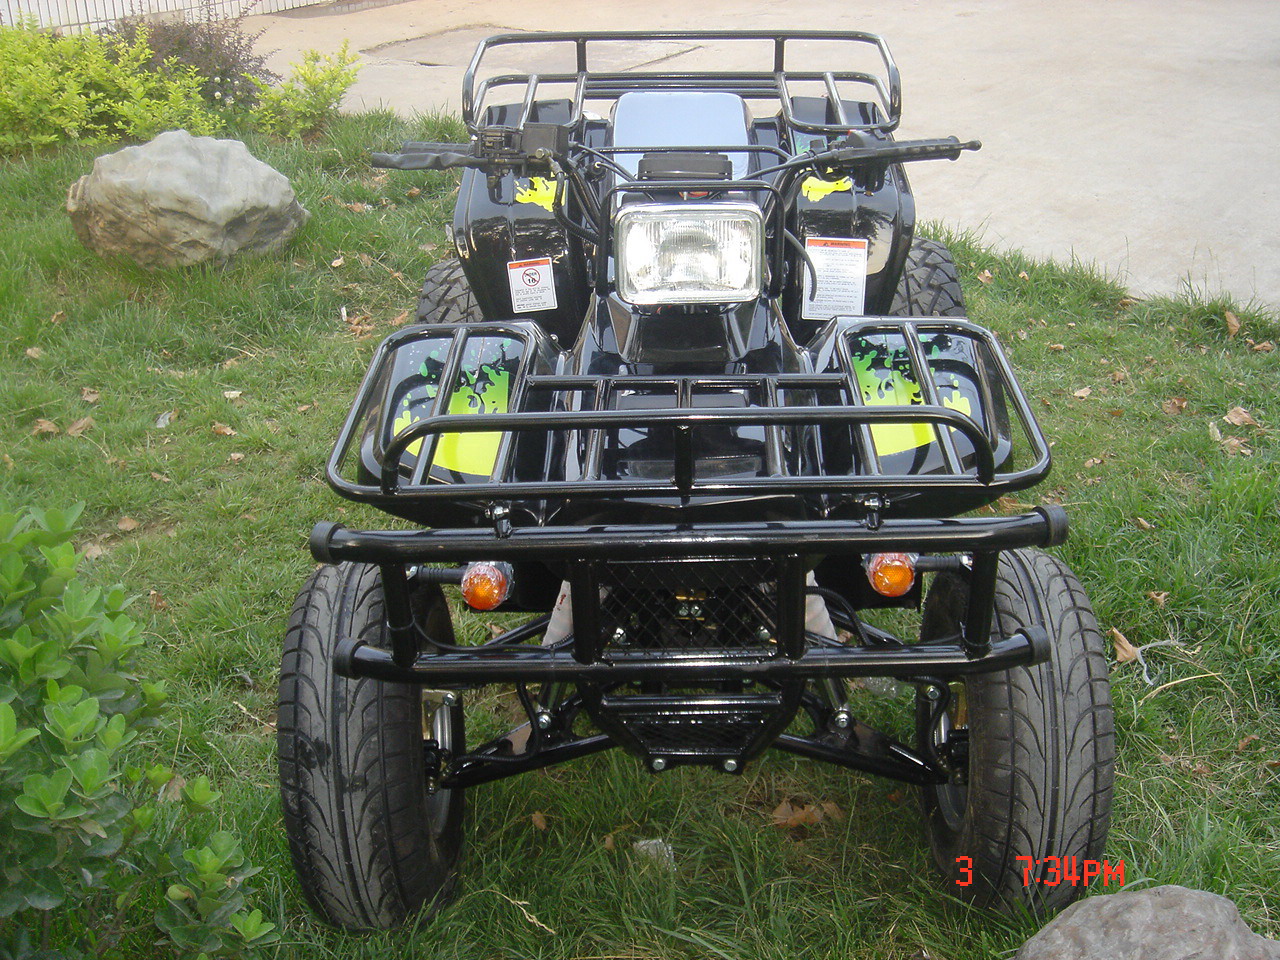 Sell 250cc ATV(with EEC approved)